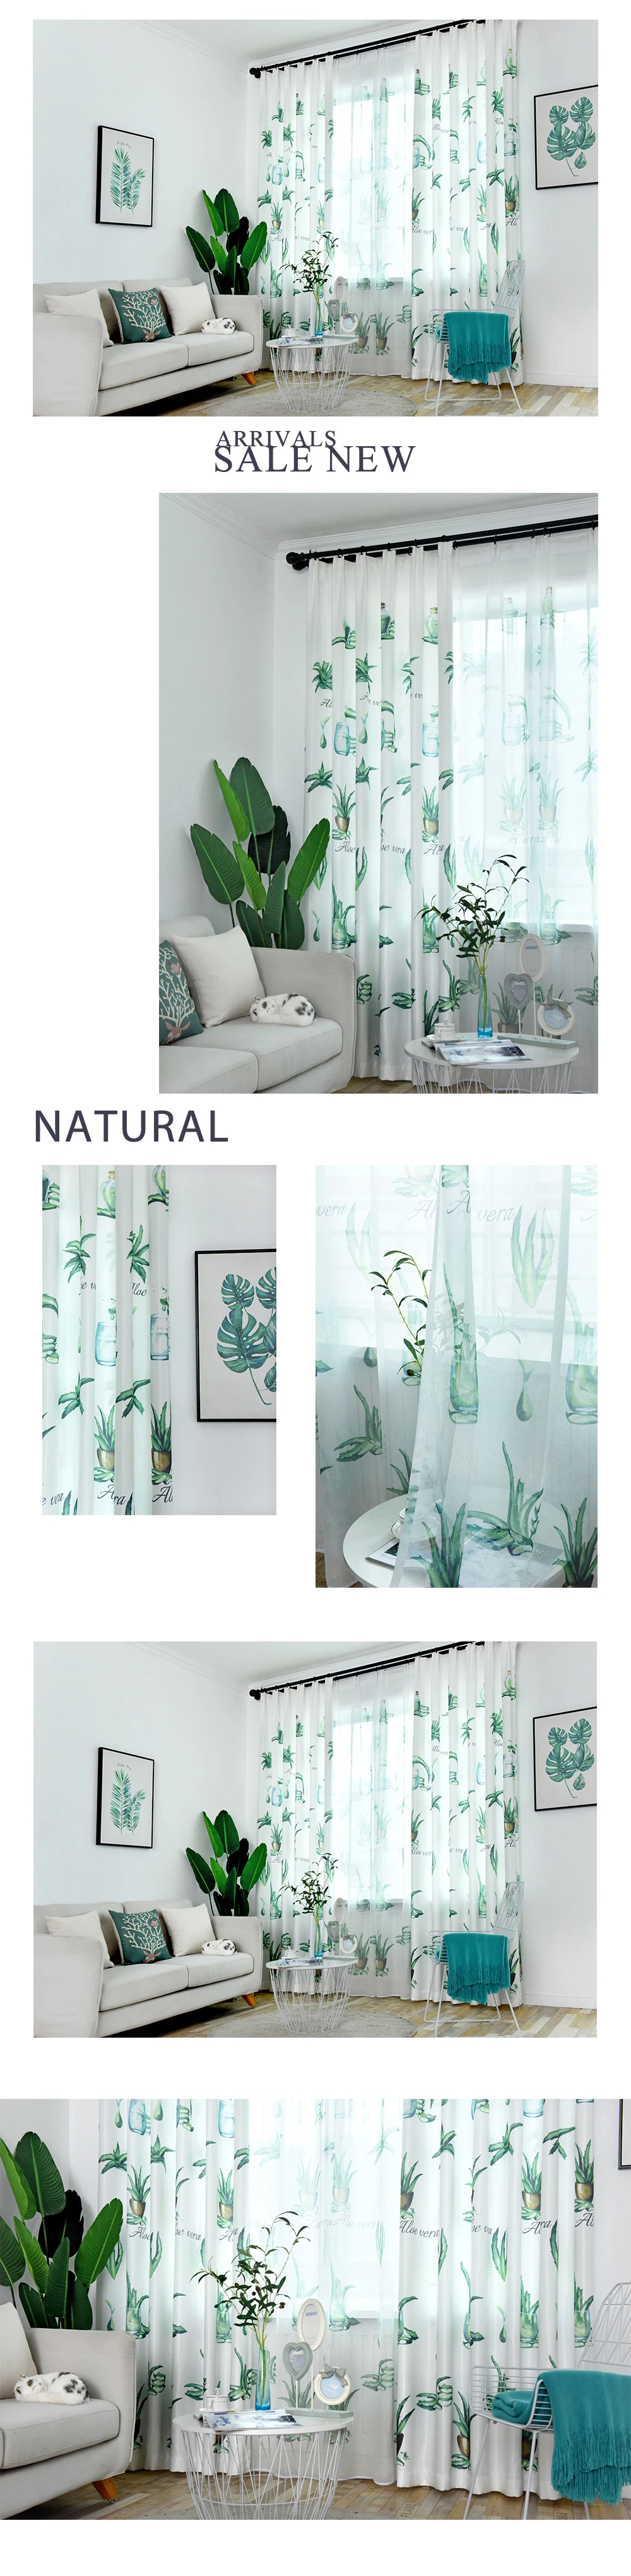 SZ114 LOZUJOJU Rideaux Window Customized curtains for living room bedroom elegant drops all match tulle single piece fabric thread